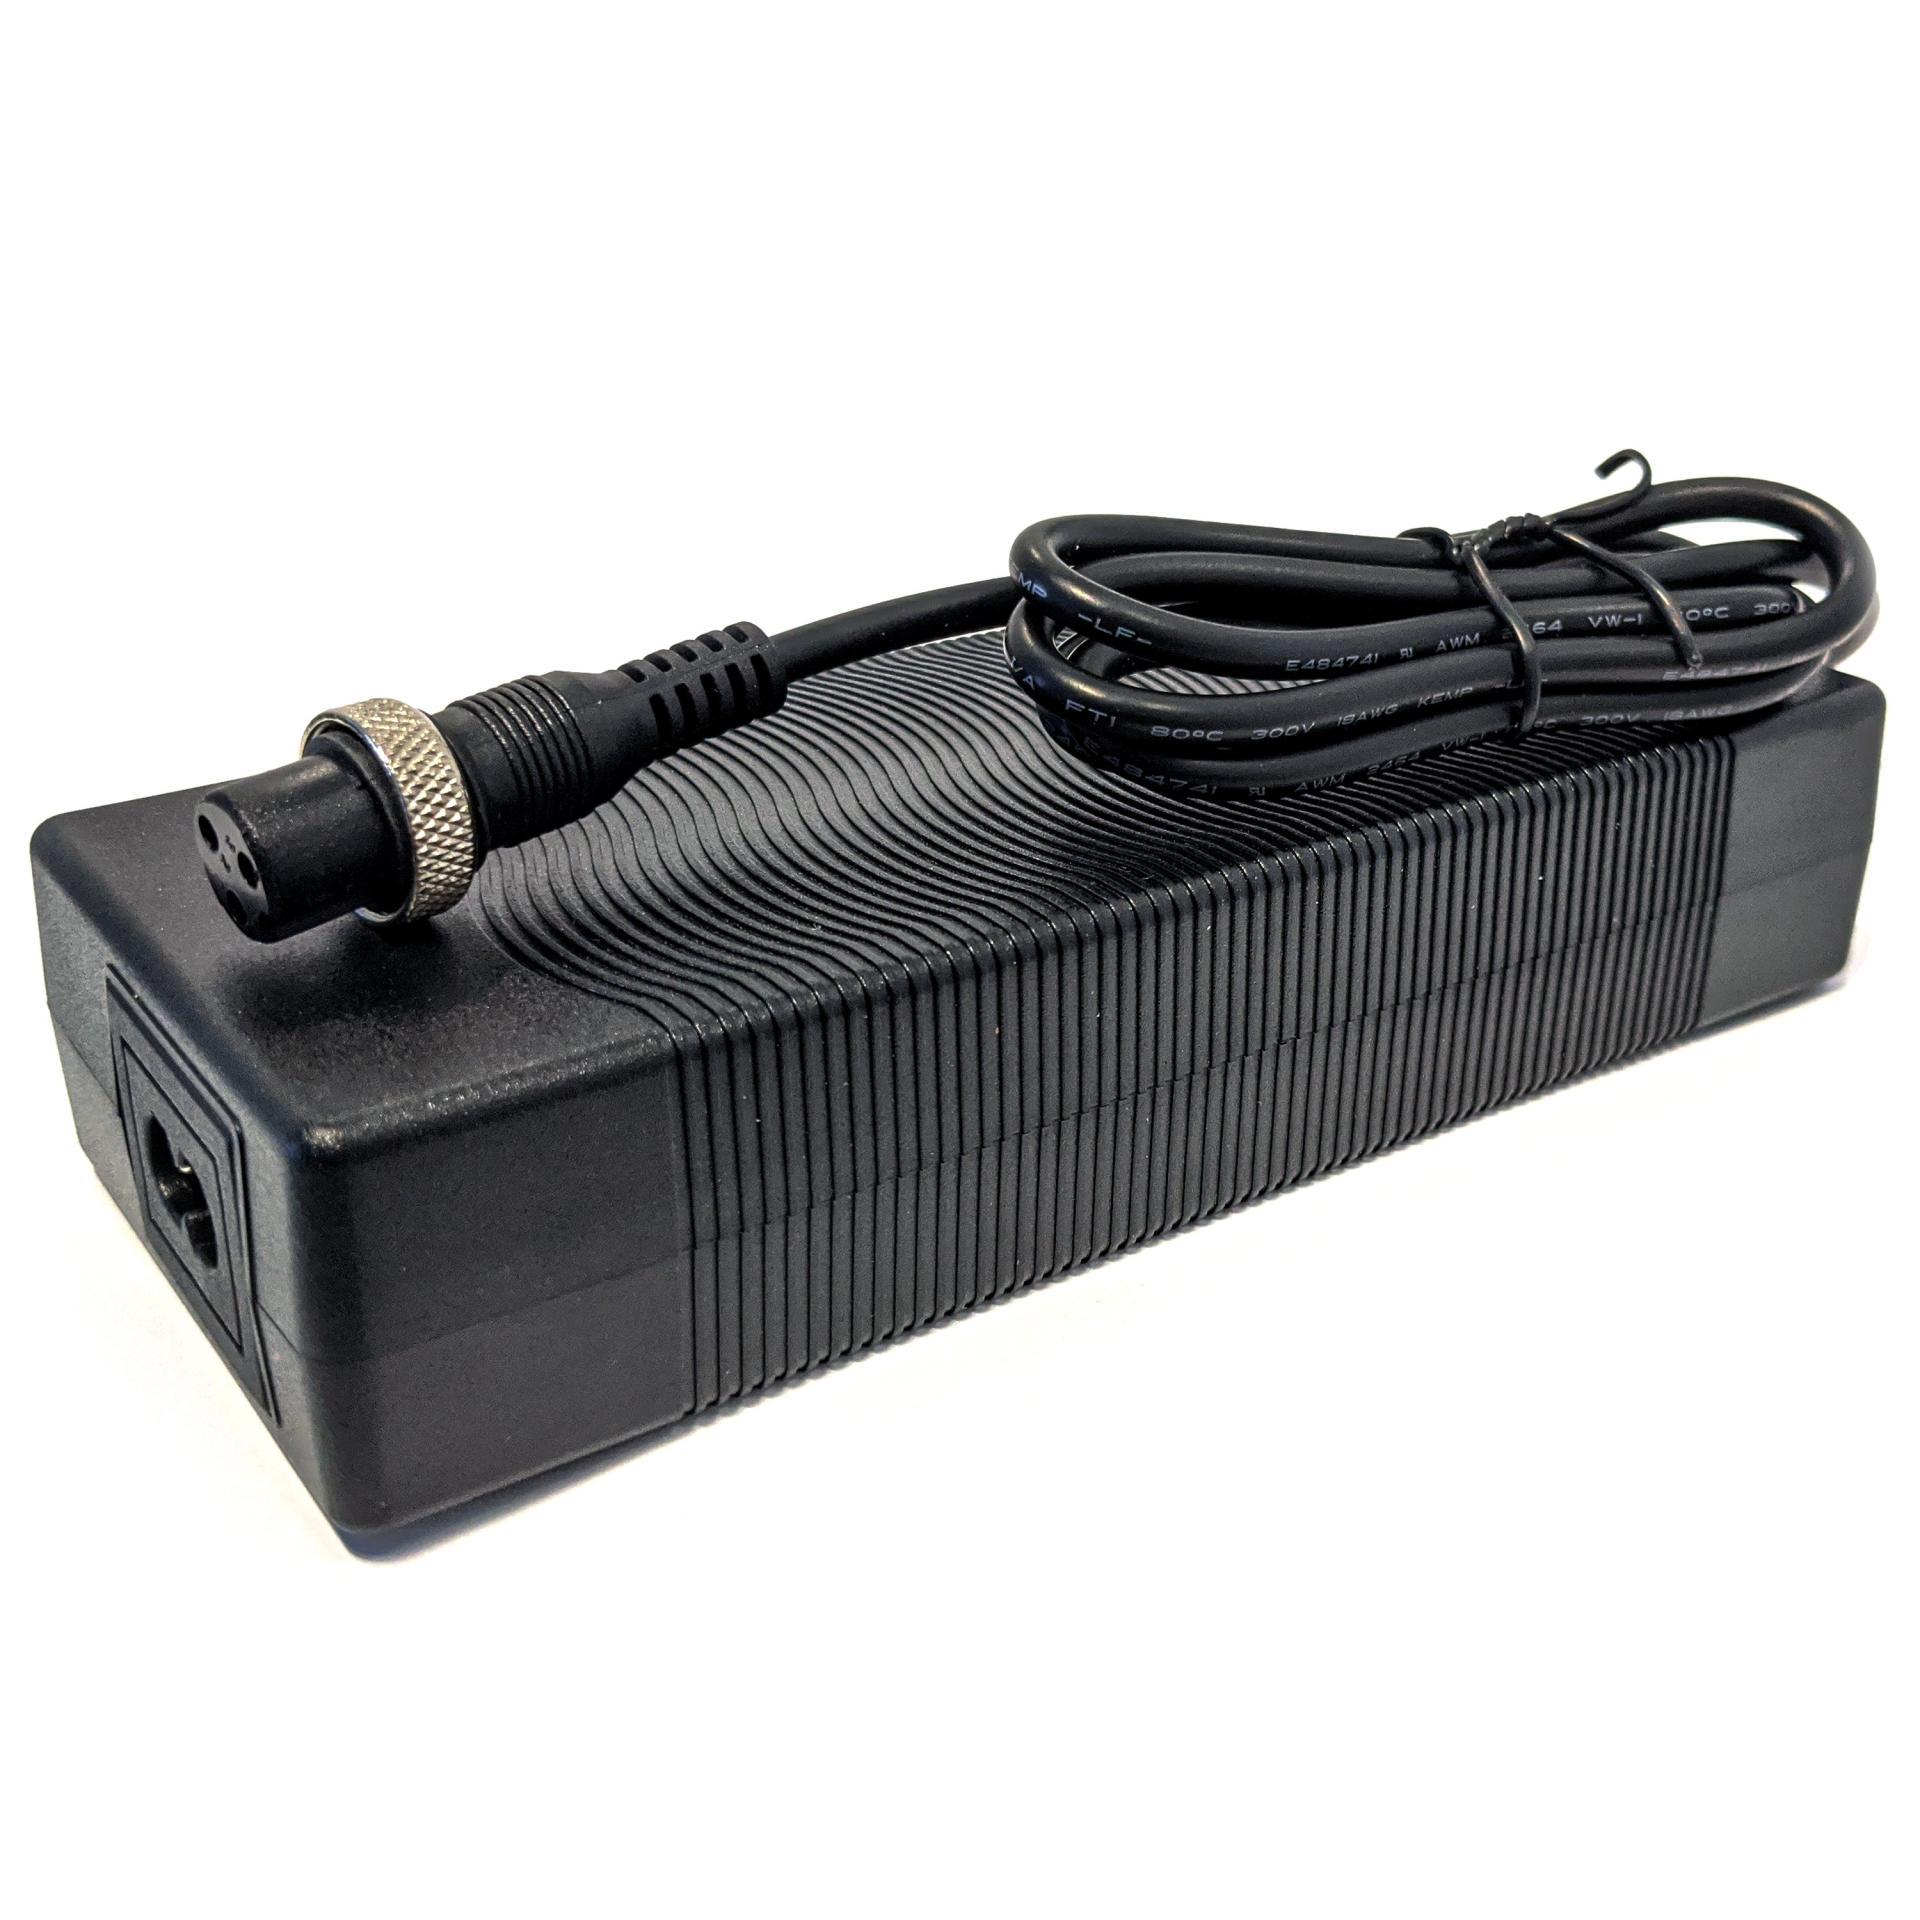 48V 2A Slow Charger for Speedway Mini, 54.0V Max, GX16 Plug